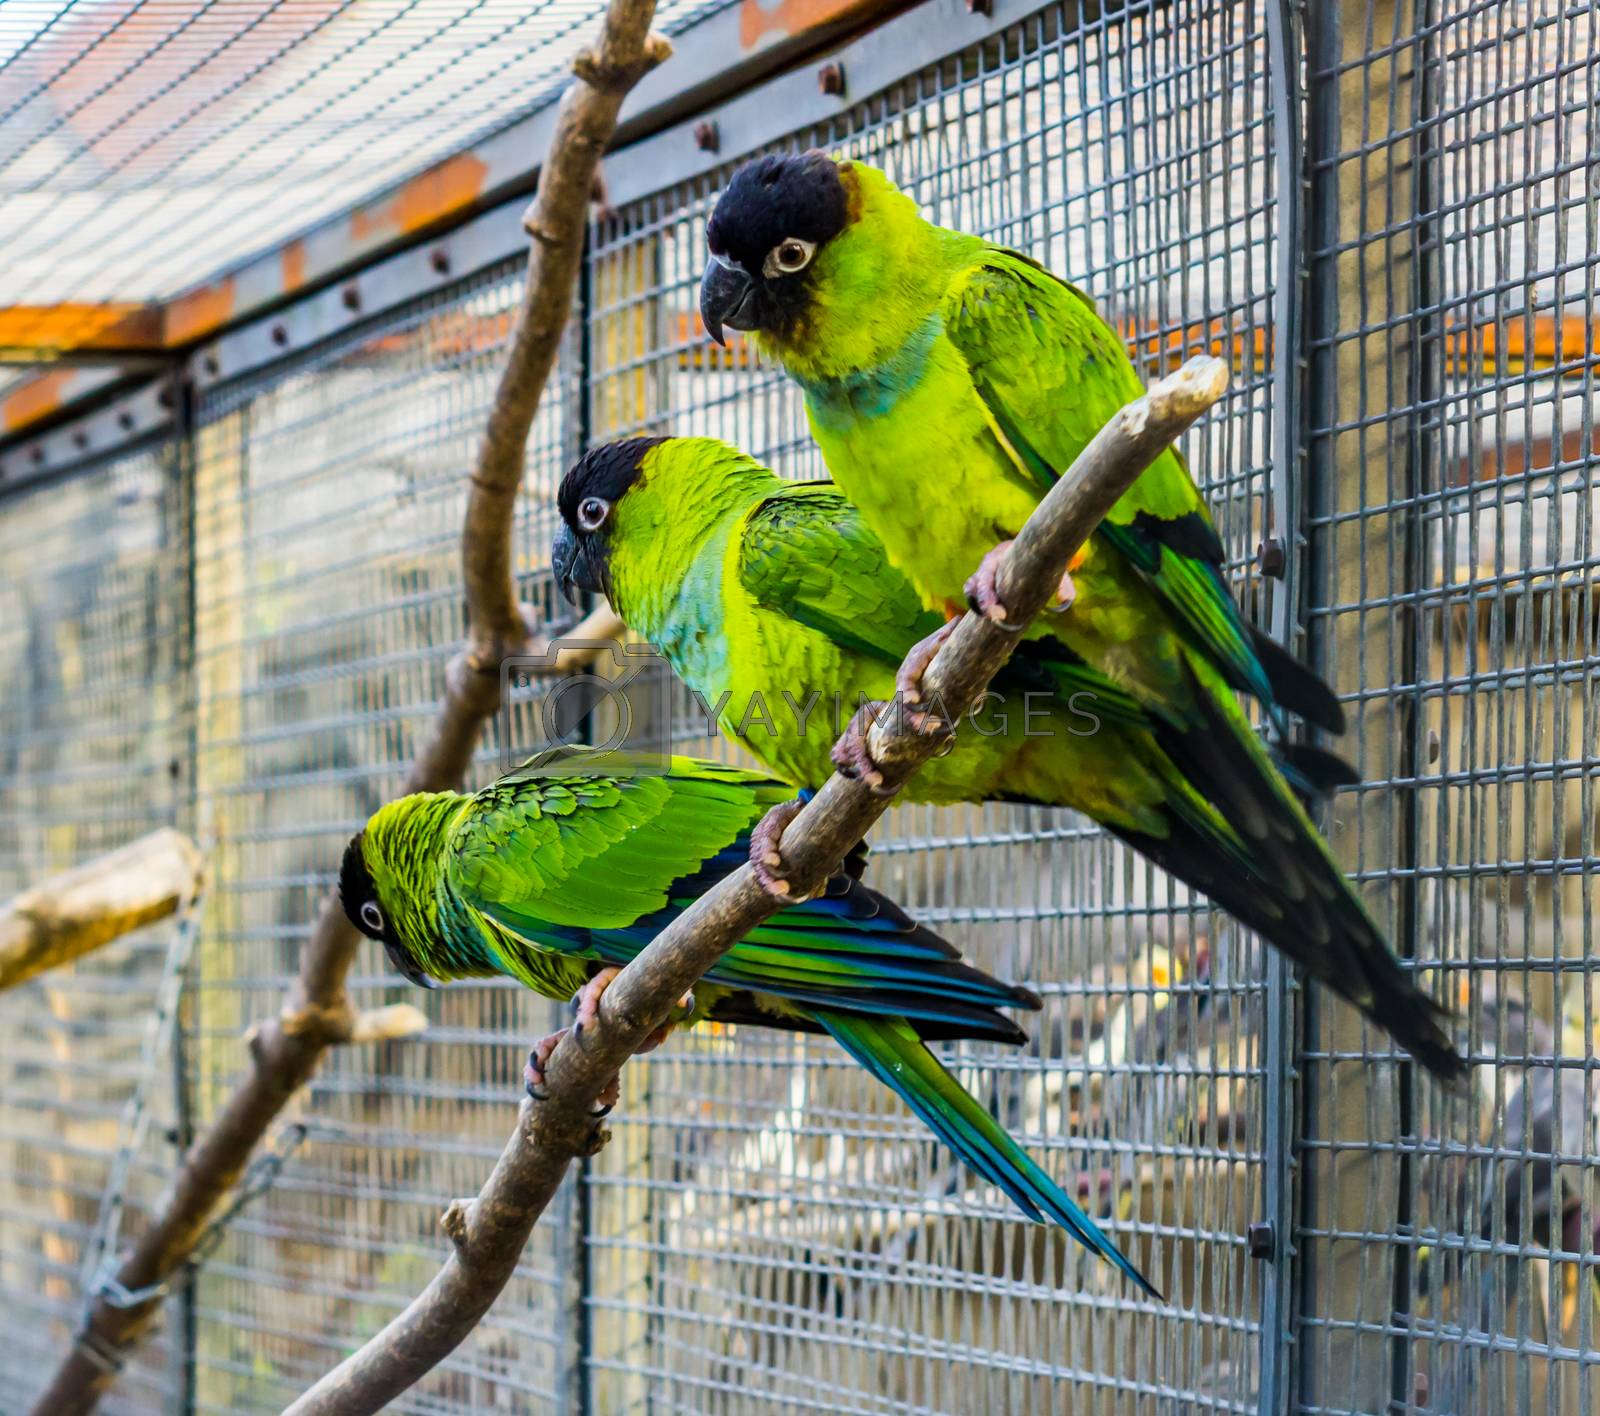 Three Nanday conures sitting together on a branch in the aviary, Popular pets in aviculture, Tropical small parrots from America